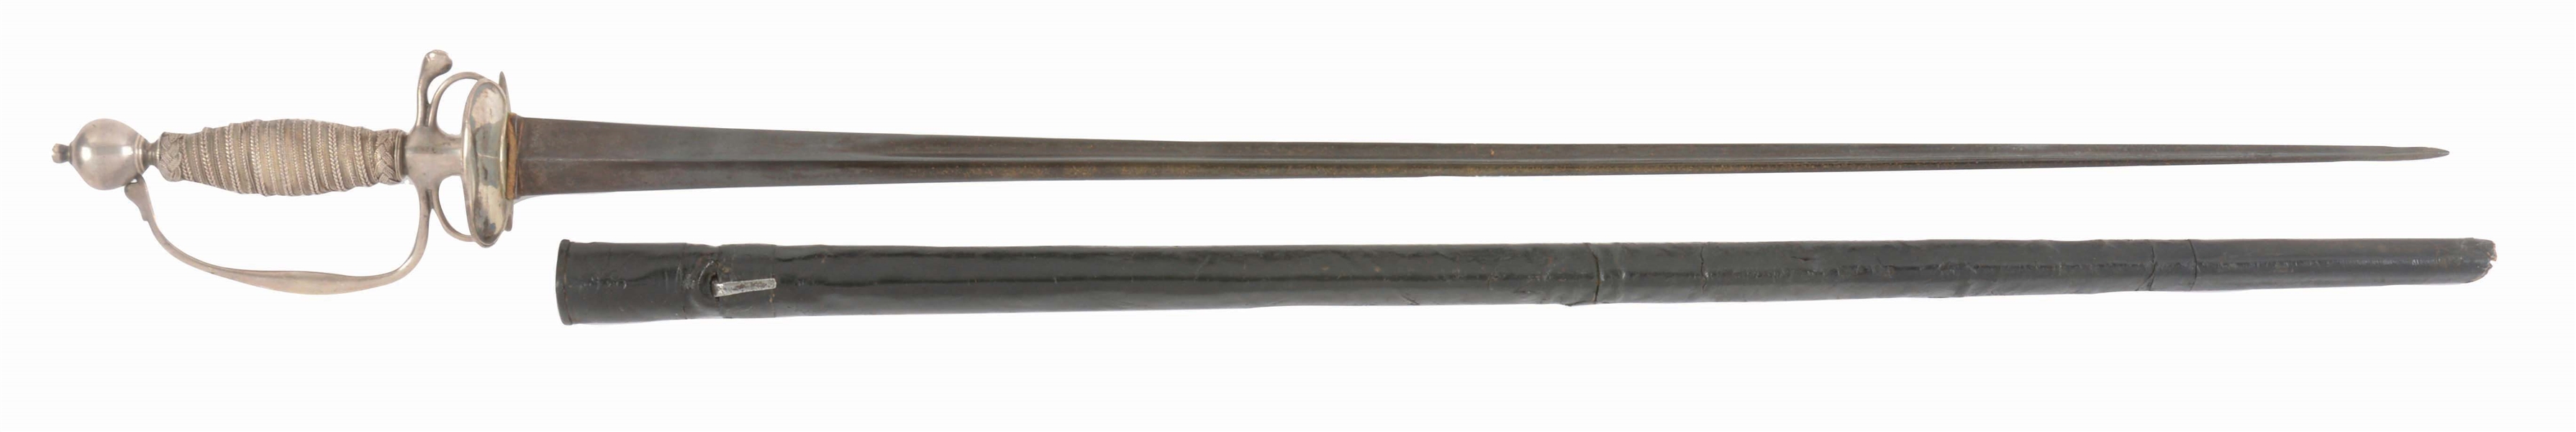 AMERICAN SILVER-HILTED SMALL SWORD WITH SCABBARD, ATTRIBUTED TO ELIAS PELLETREU.